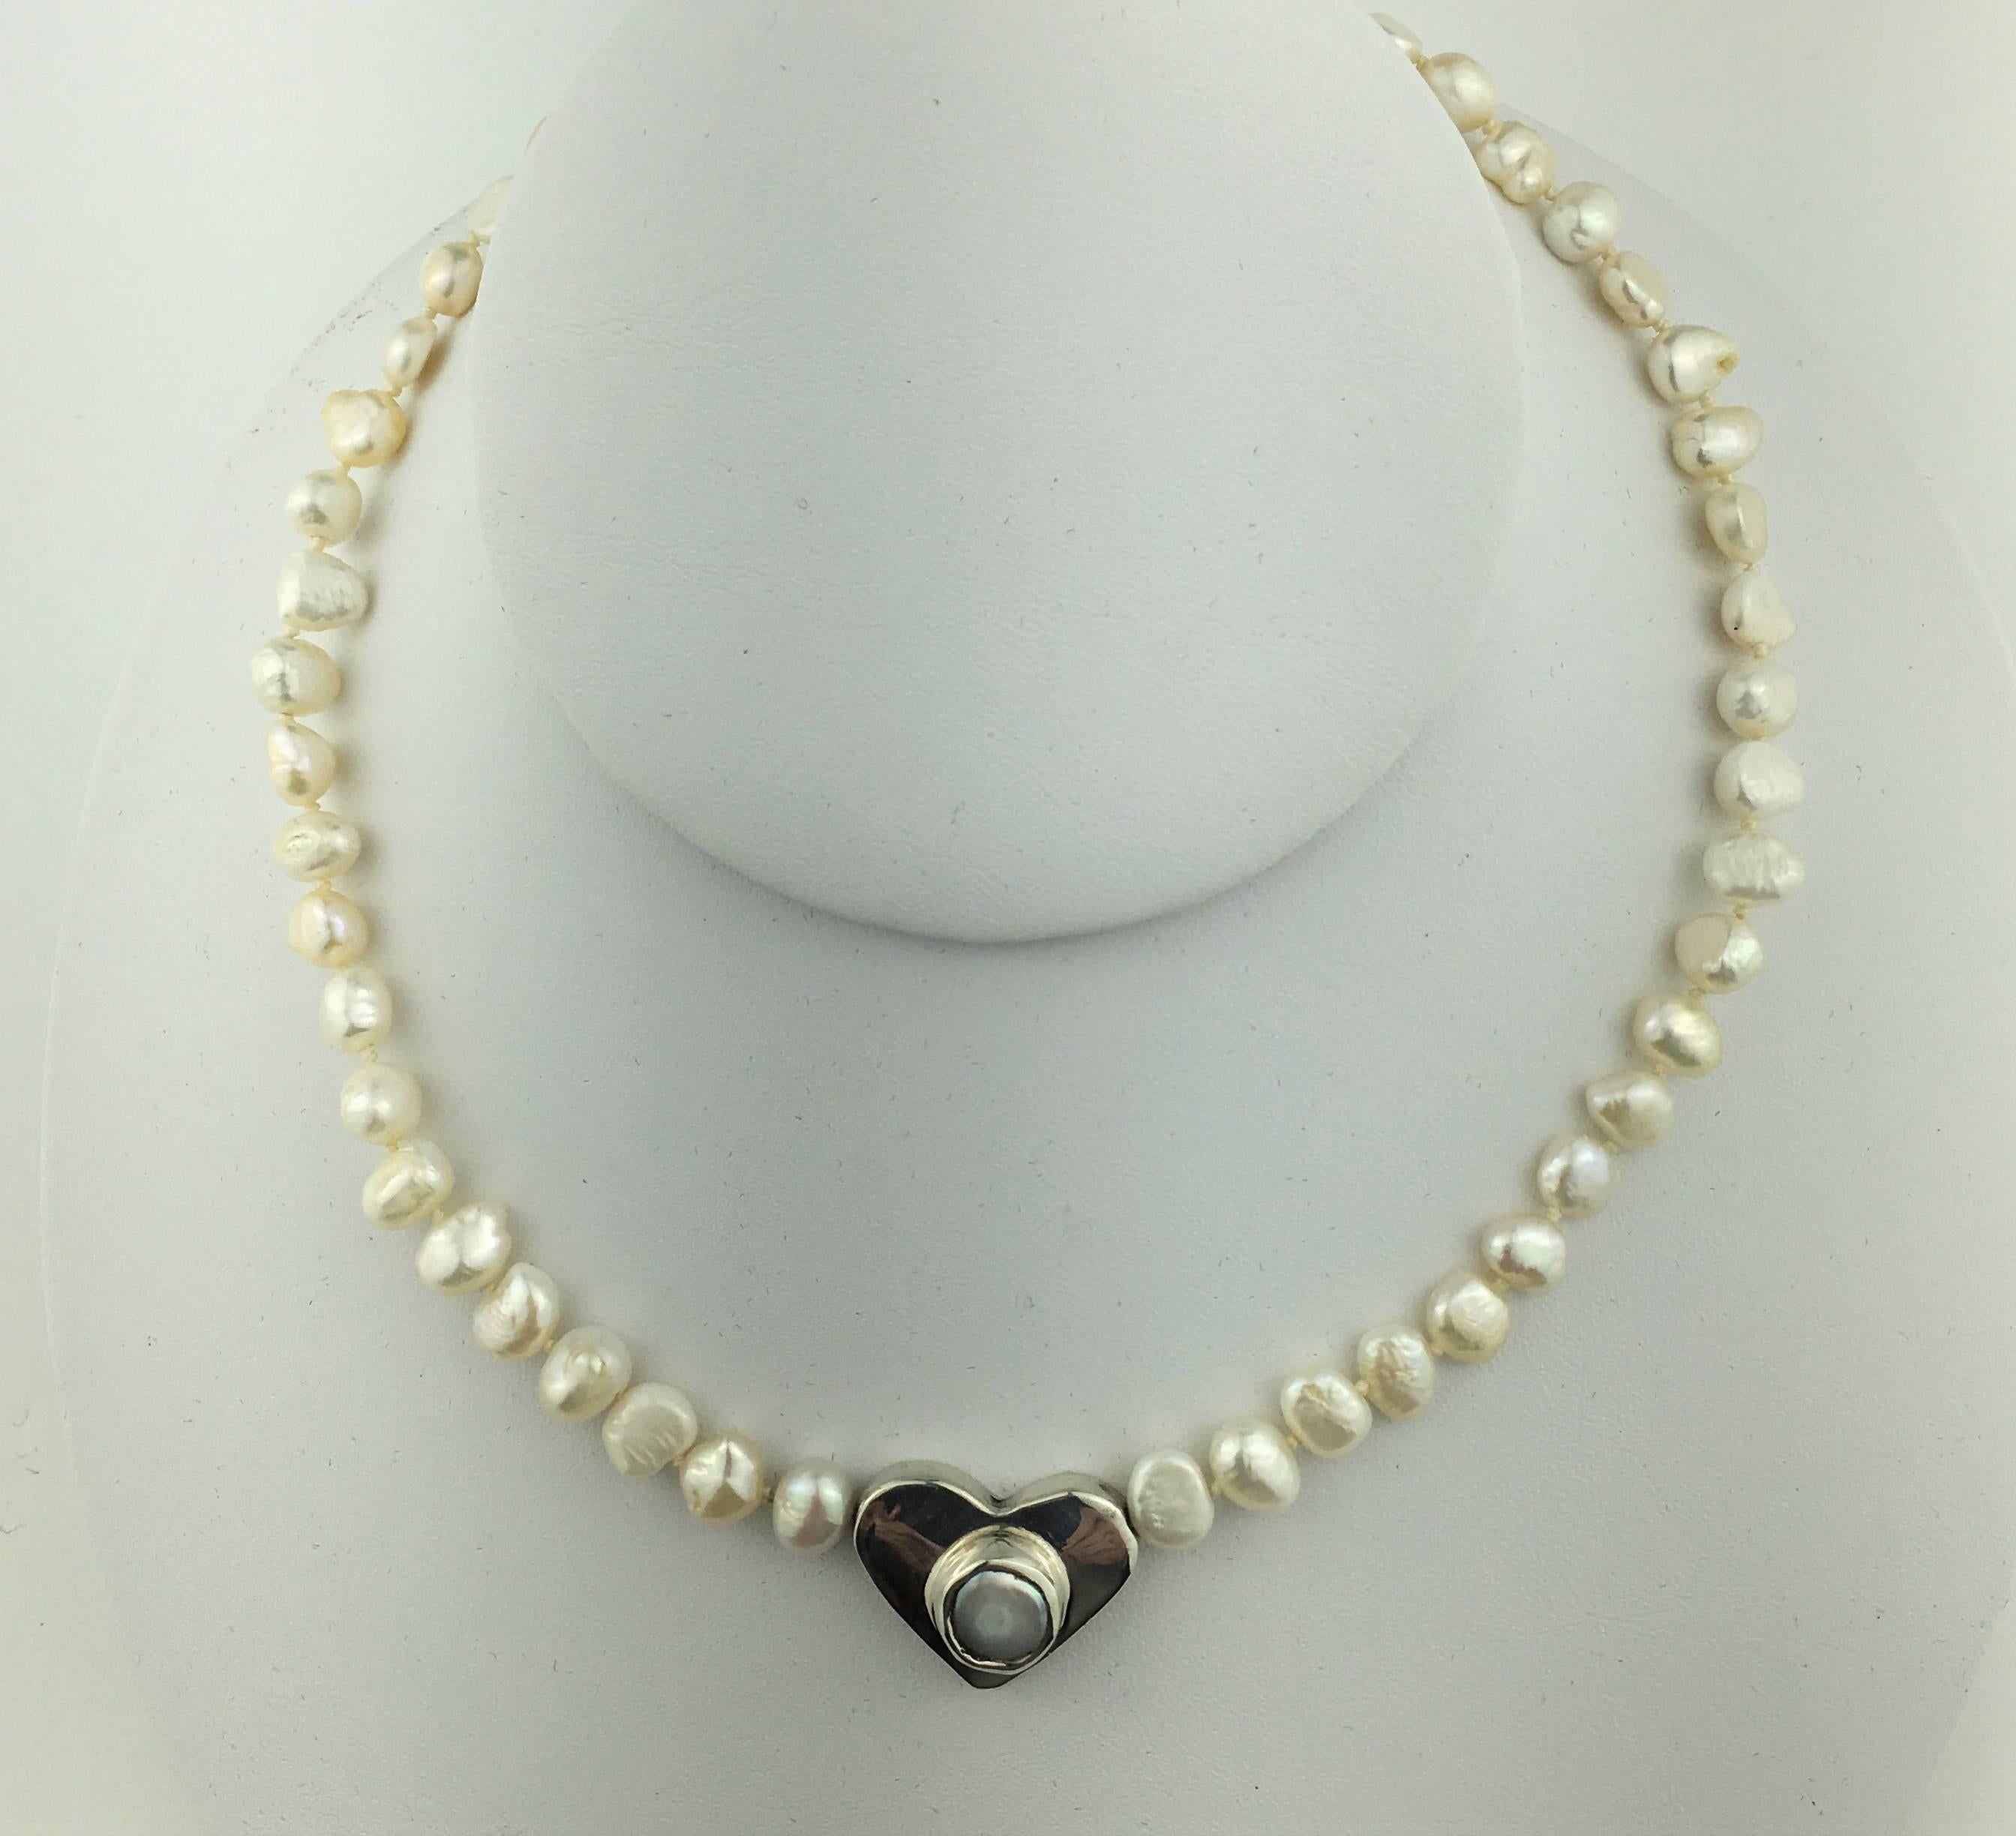 Lovely White freshwater pearl choker necklace with Sterling Silver Heart with a pearl in the center.  This beautiful necklace will go everywhere, put it on and go.  Lobster claw clasp.  15.5 Inch length.

